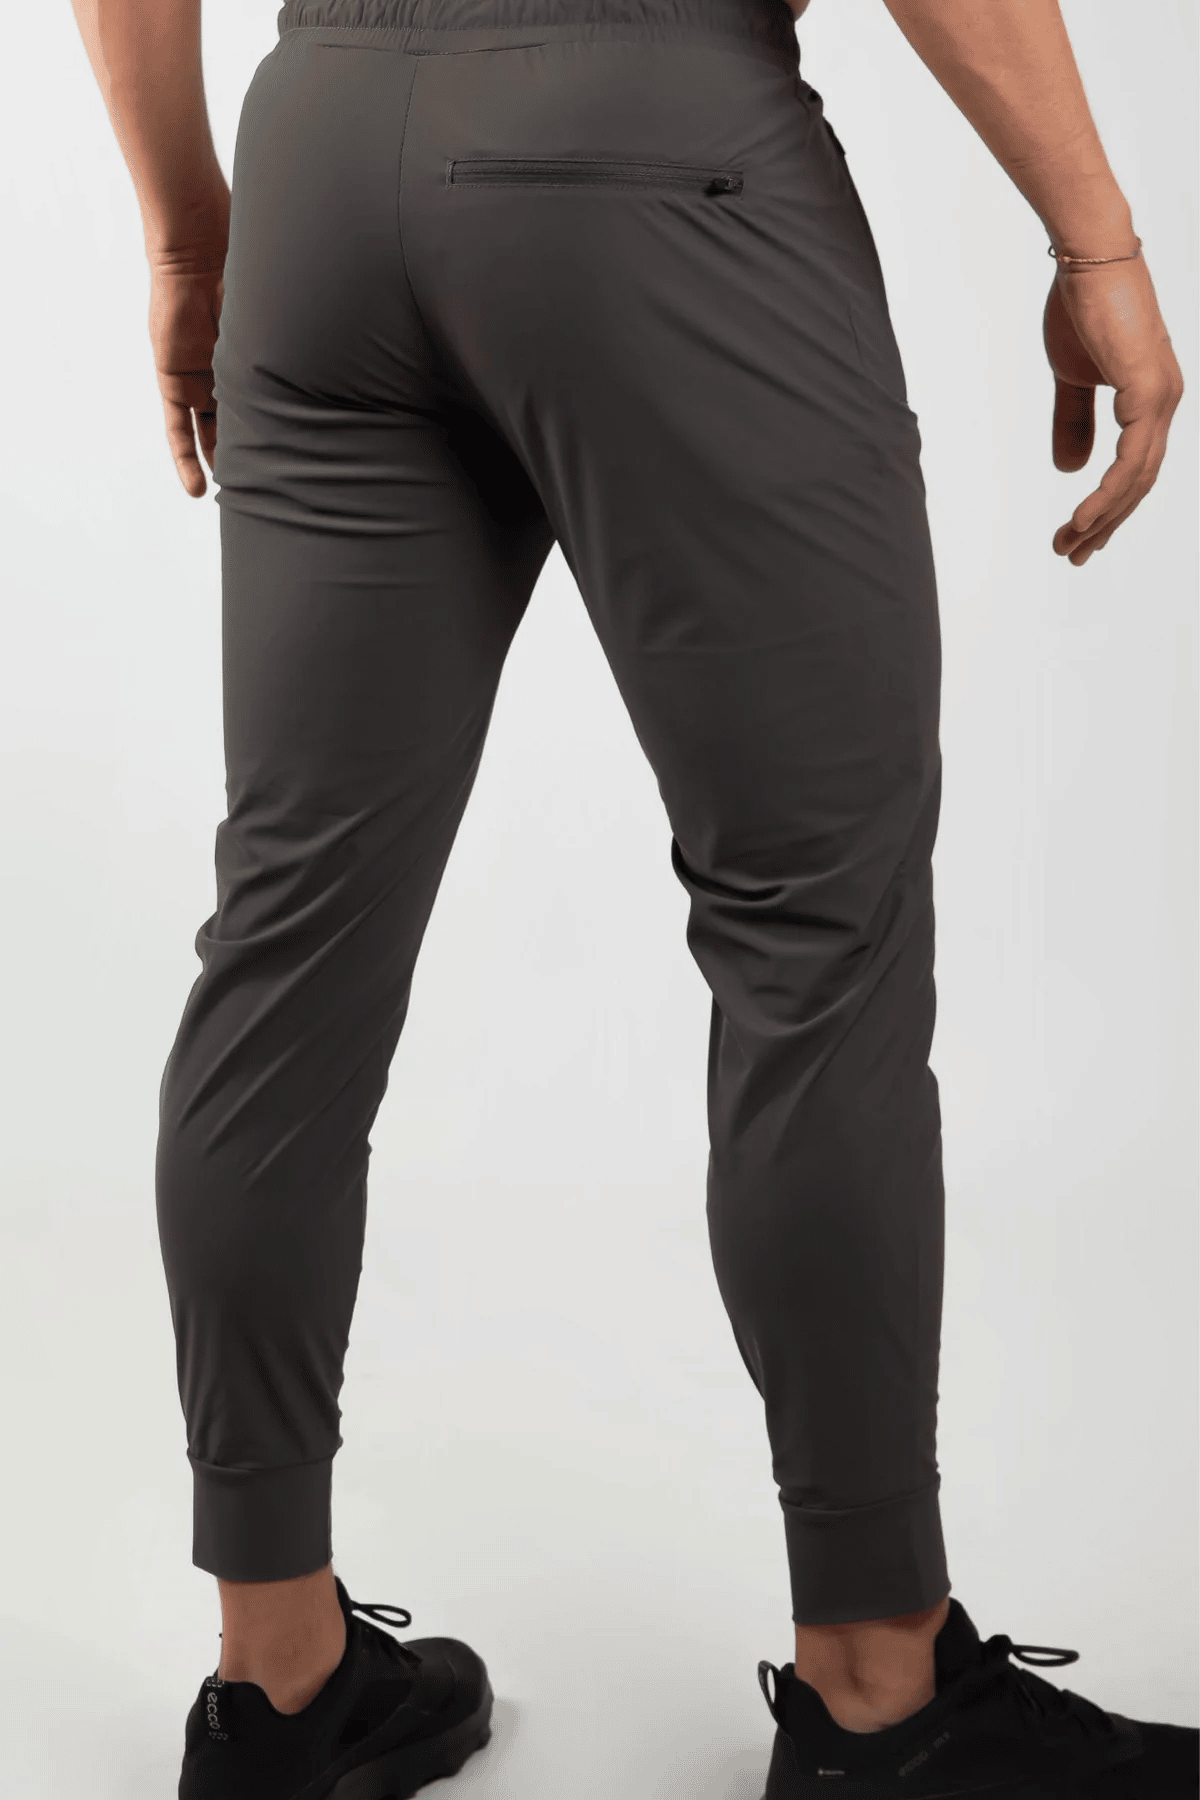 Buy 1 Get 1 Free) MEN'S HIGH STRETCH SKINNY CARGO PANTS(Black & Gray) –  Space Life Company